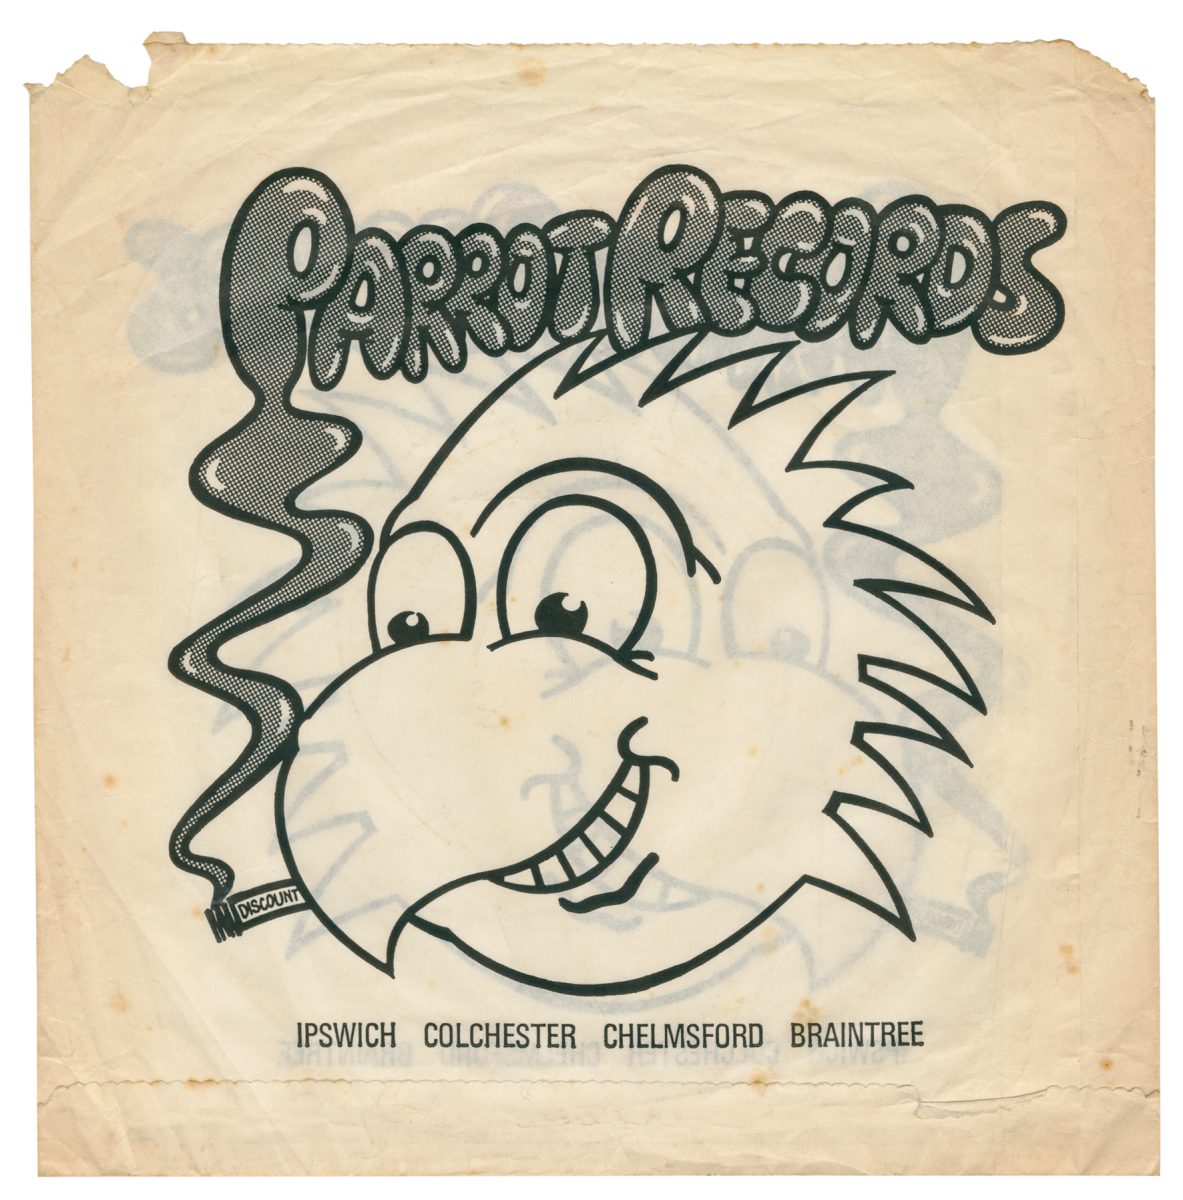 Parrot Records